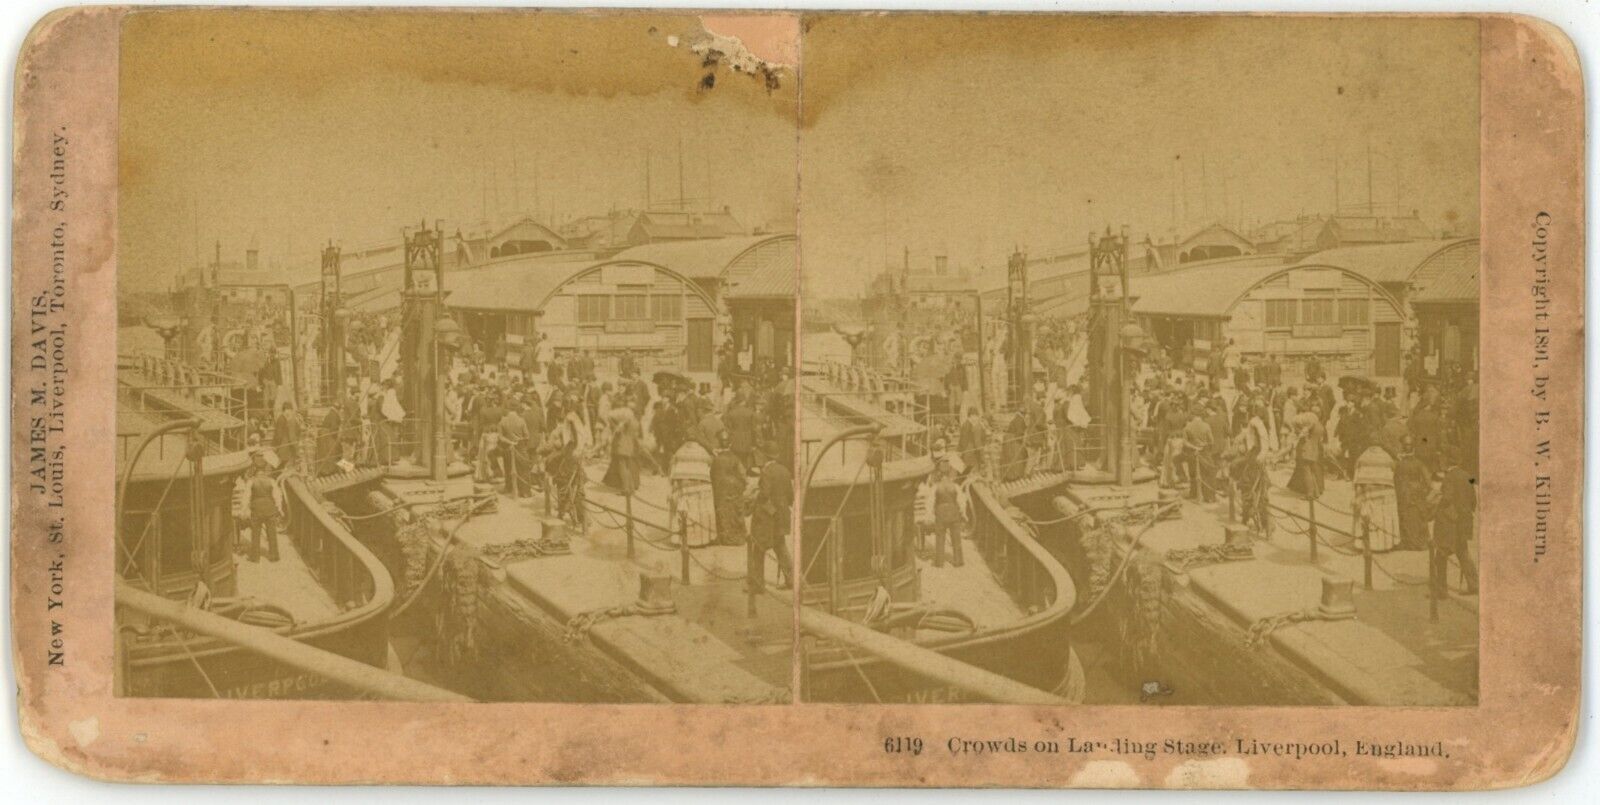 1891 Real Photo Stereoview Card Crowds on Landing Stage Liverpool, England